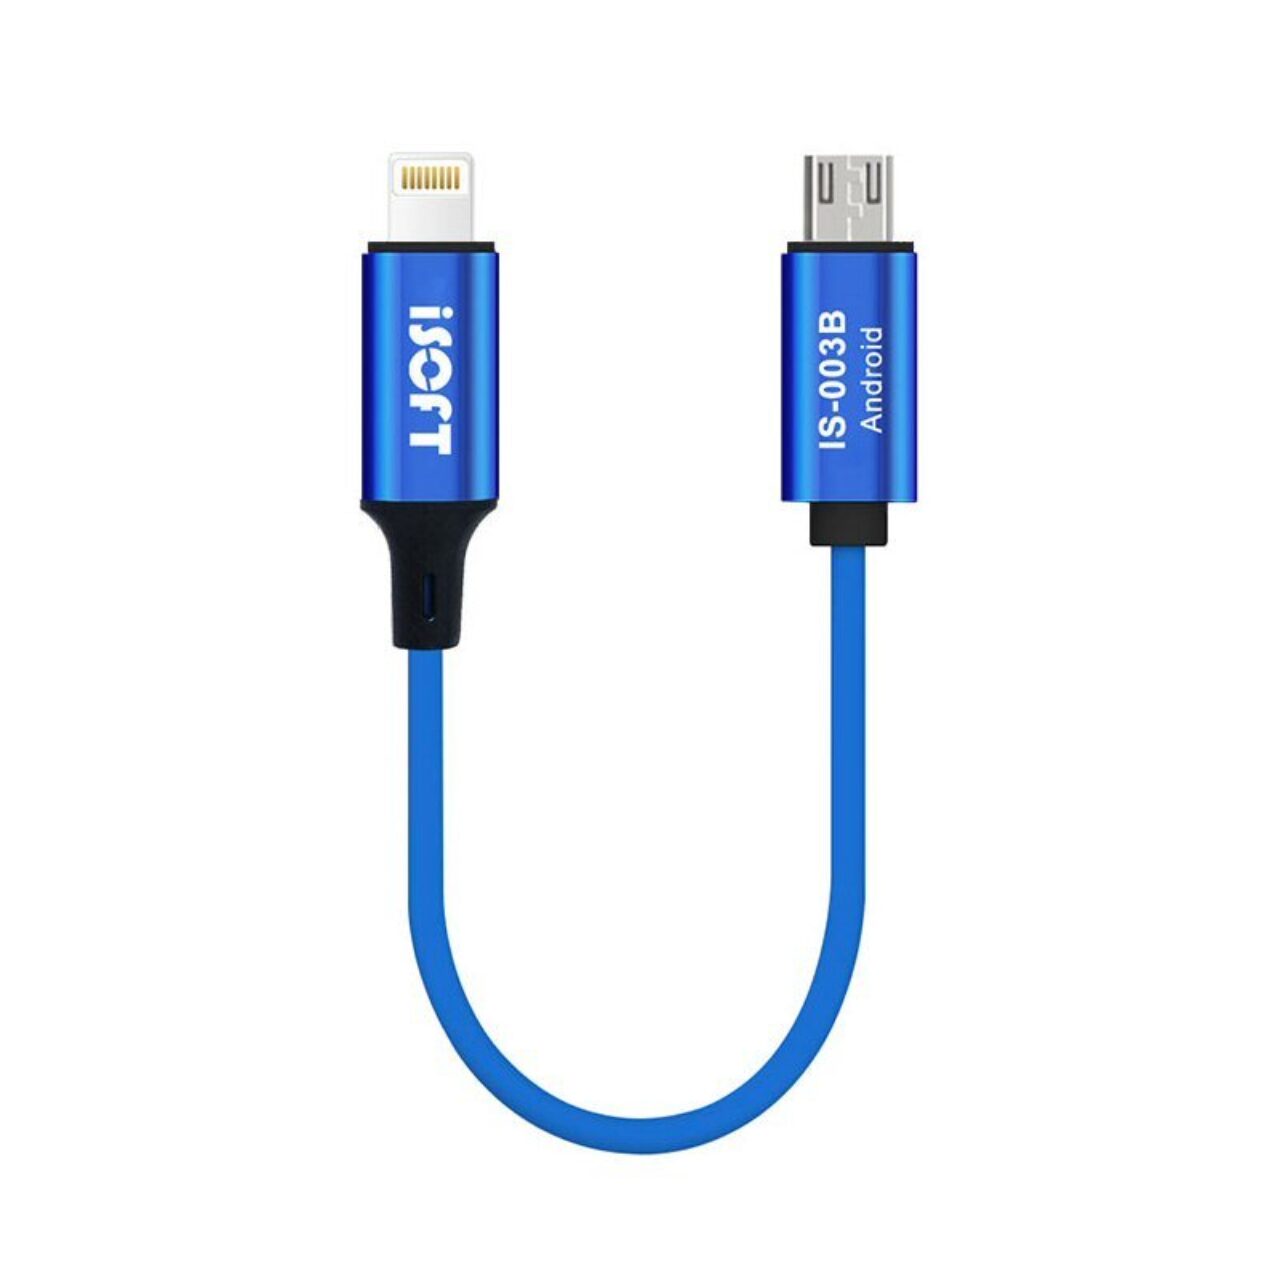 Isoft IS 003 B IP to Android data transmission cable